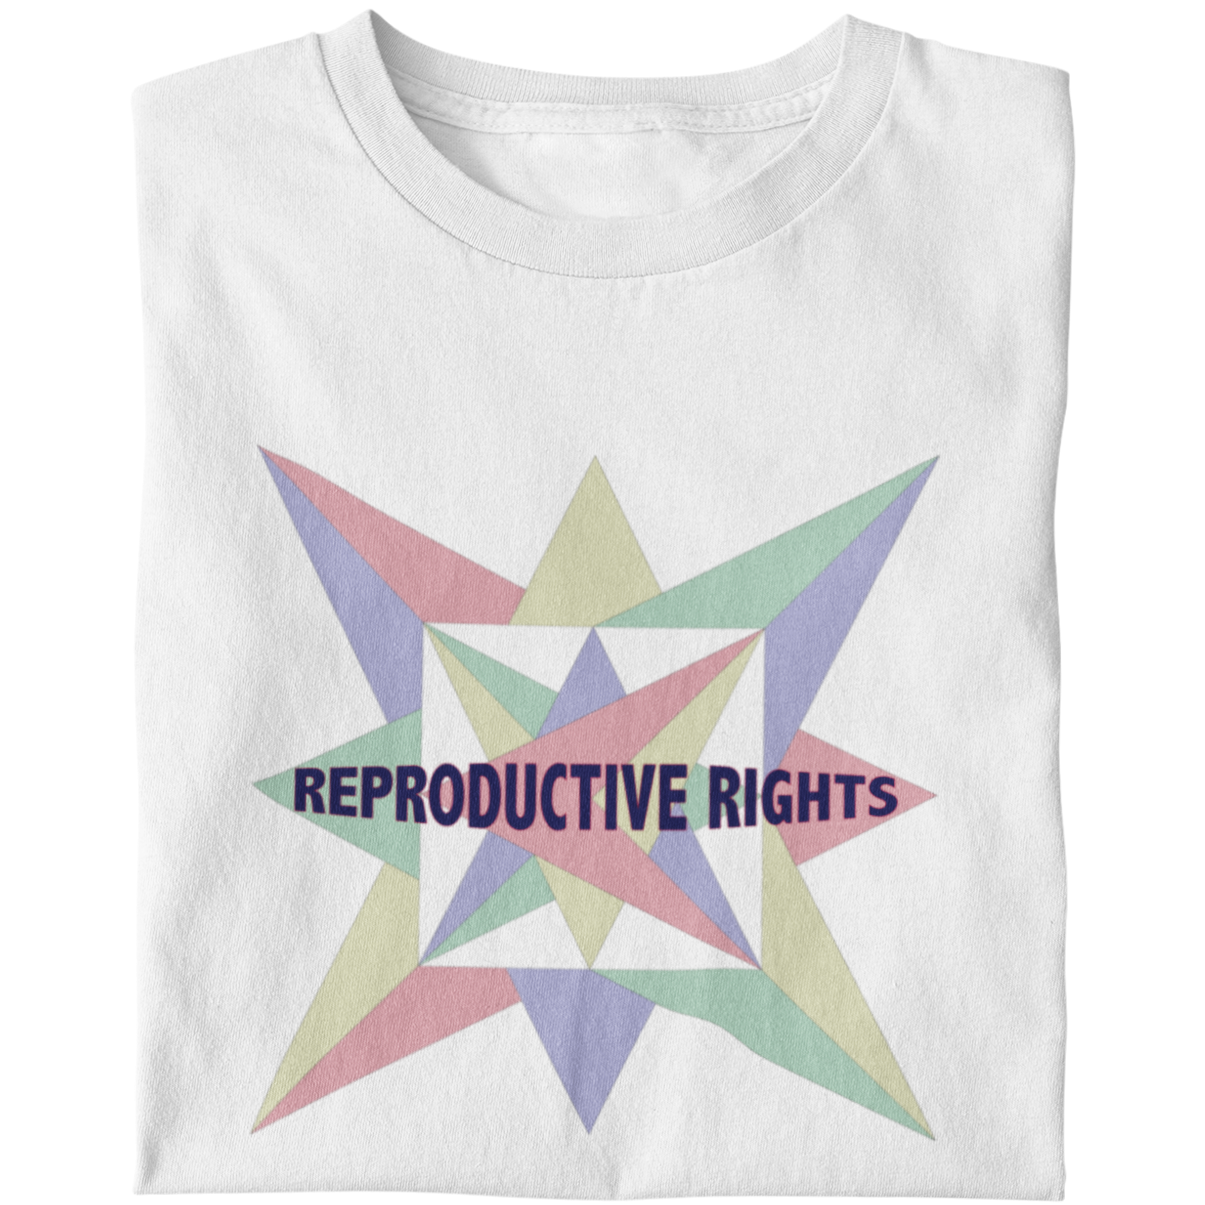 Abortion rights t-shirt